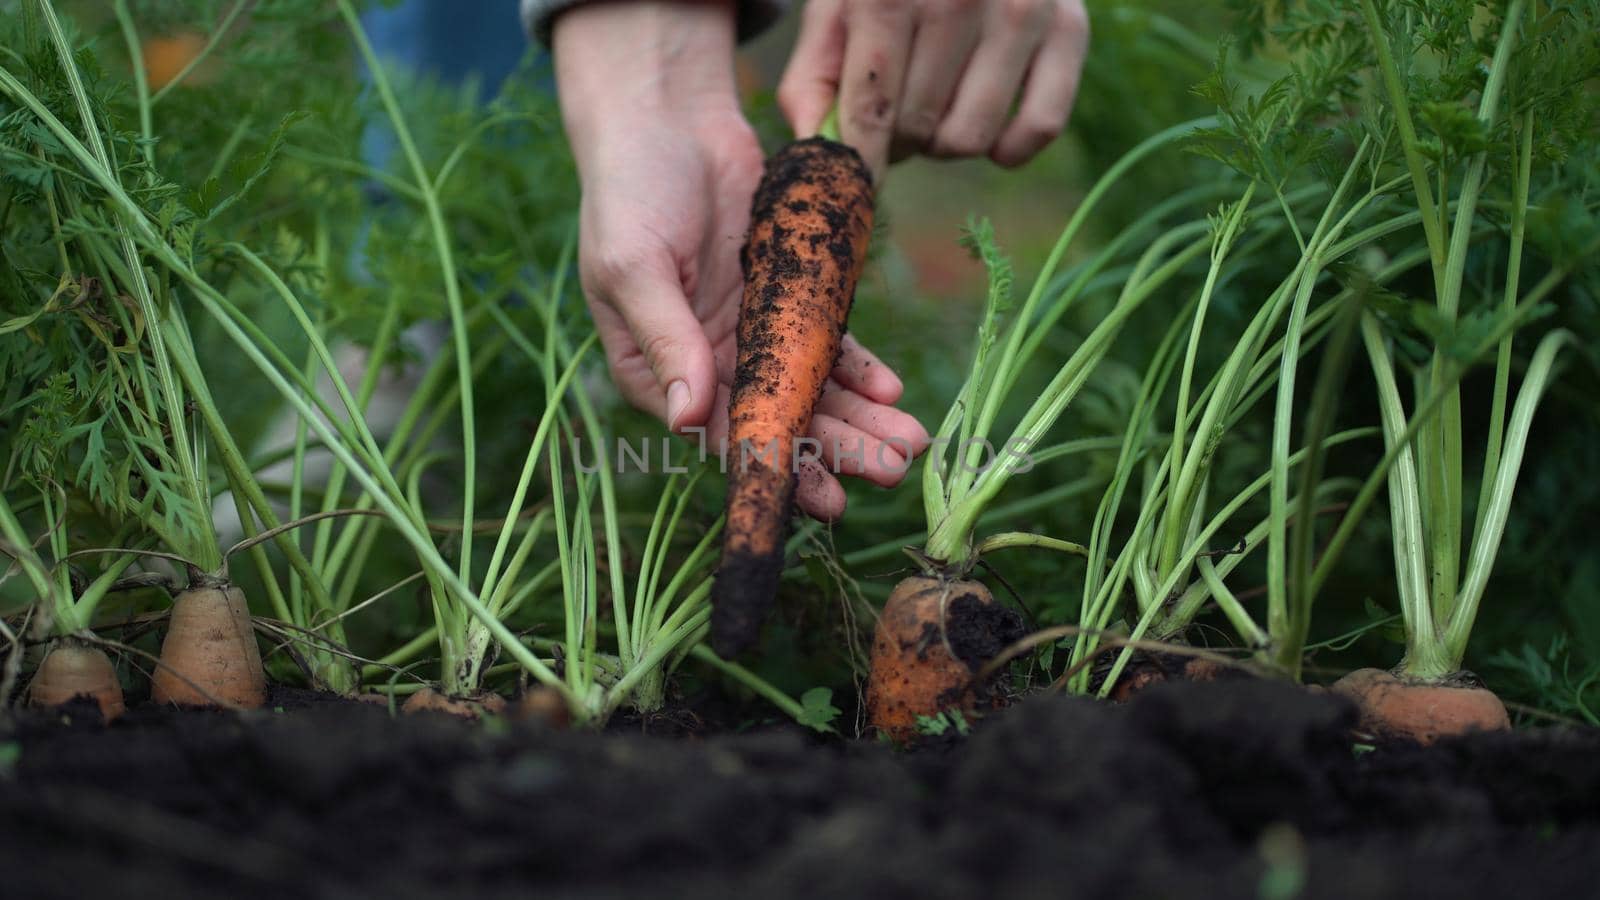 A woman takes a ripe carrot out of the ground and shows it to the camera by Petrokill